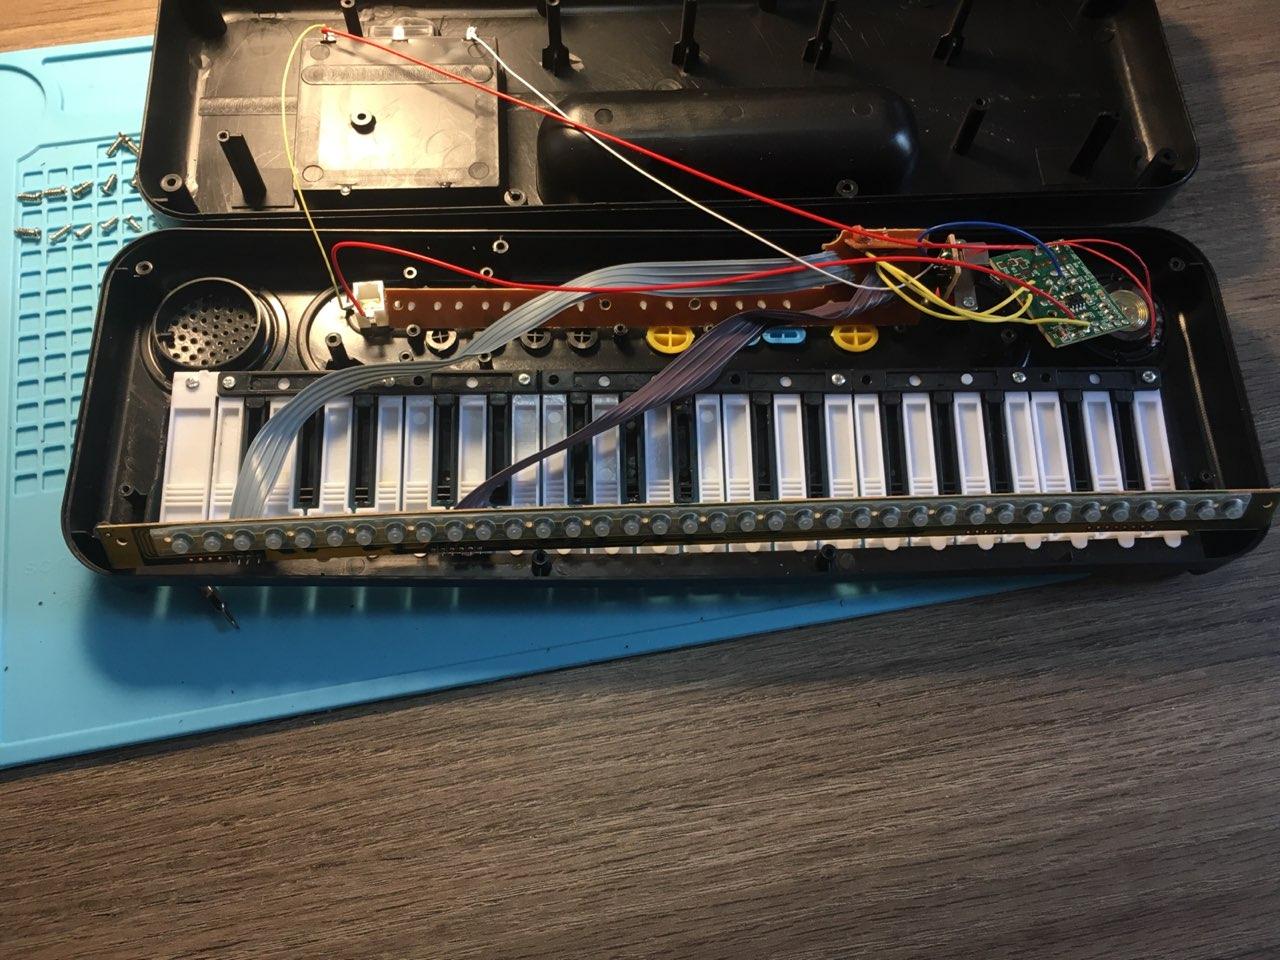 Interior of the piano, detailing the keyboard PCB with switches exposed